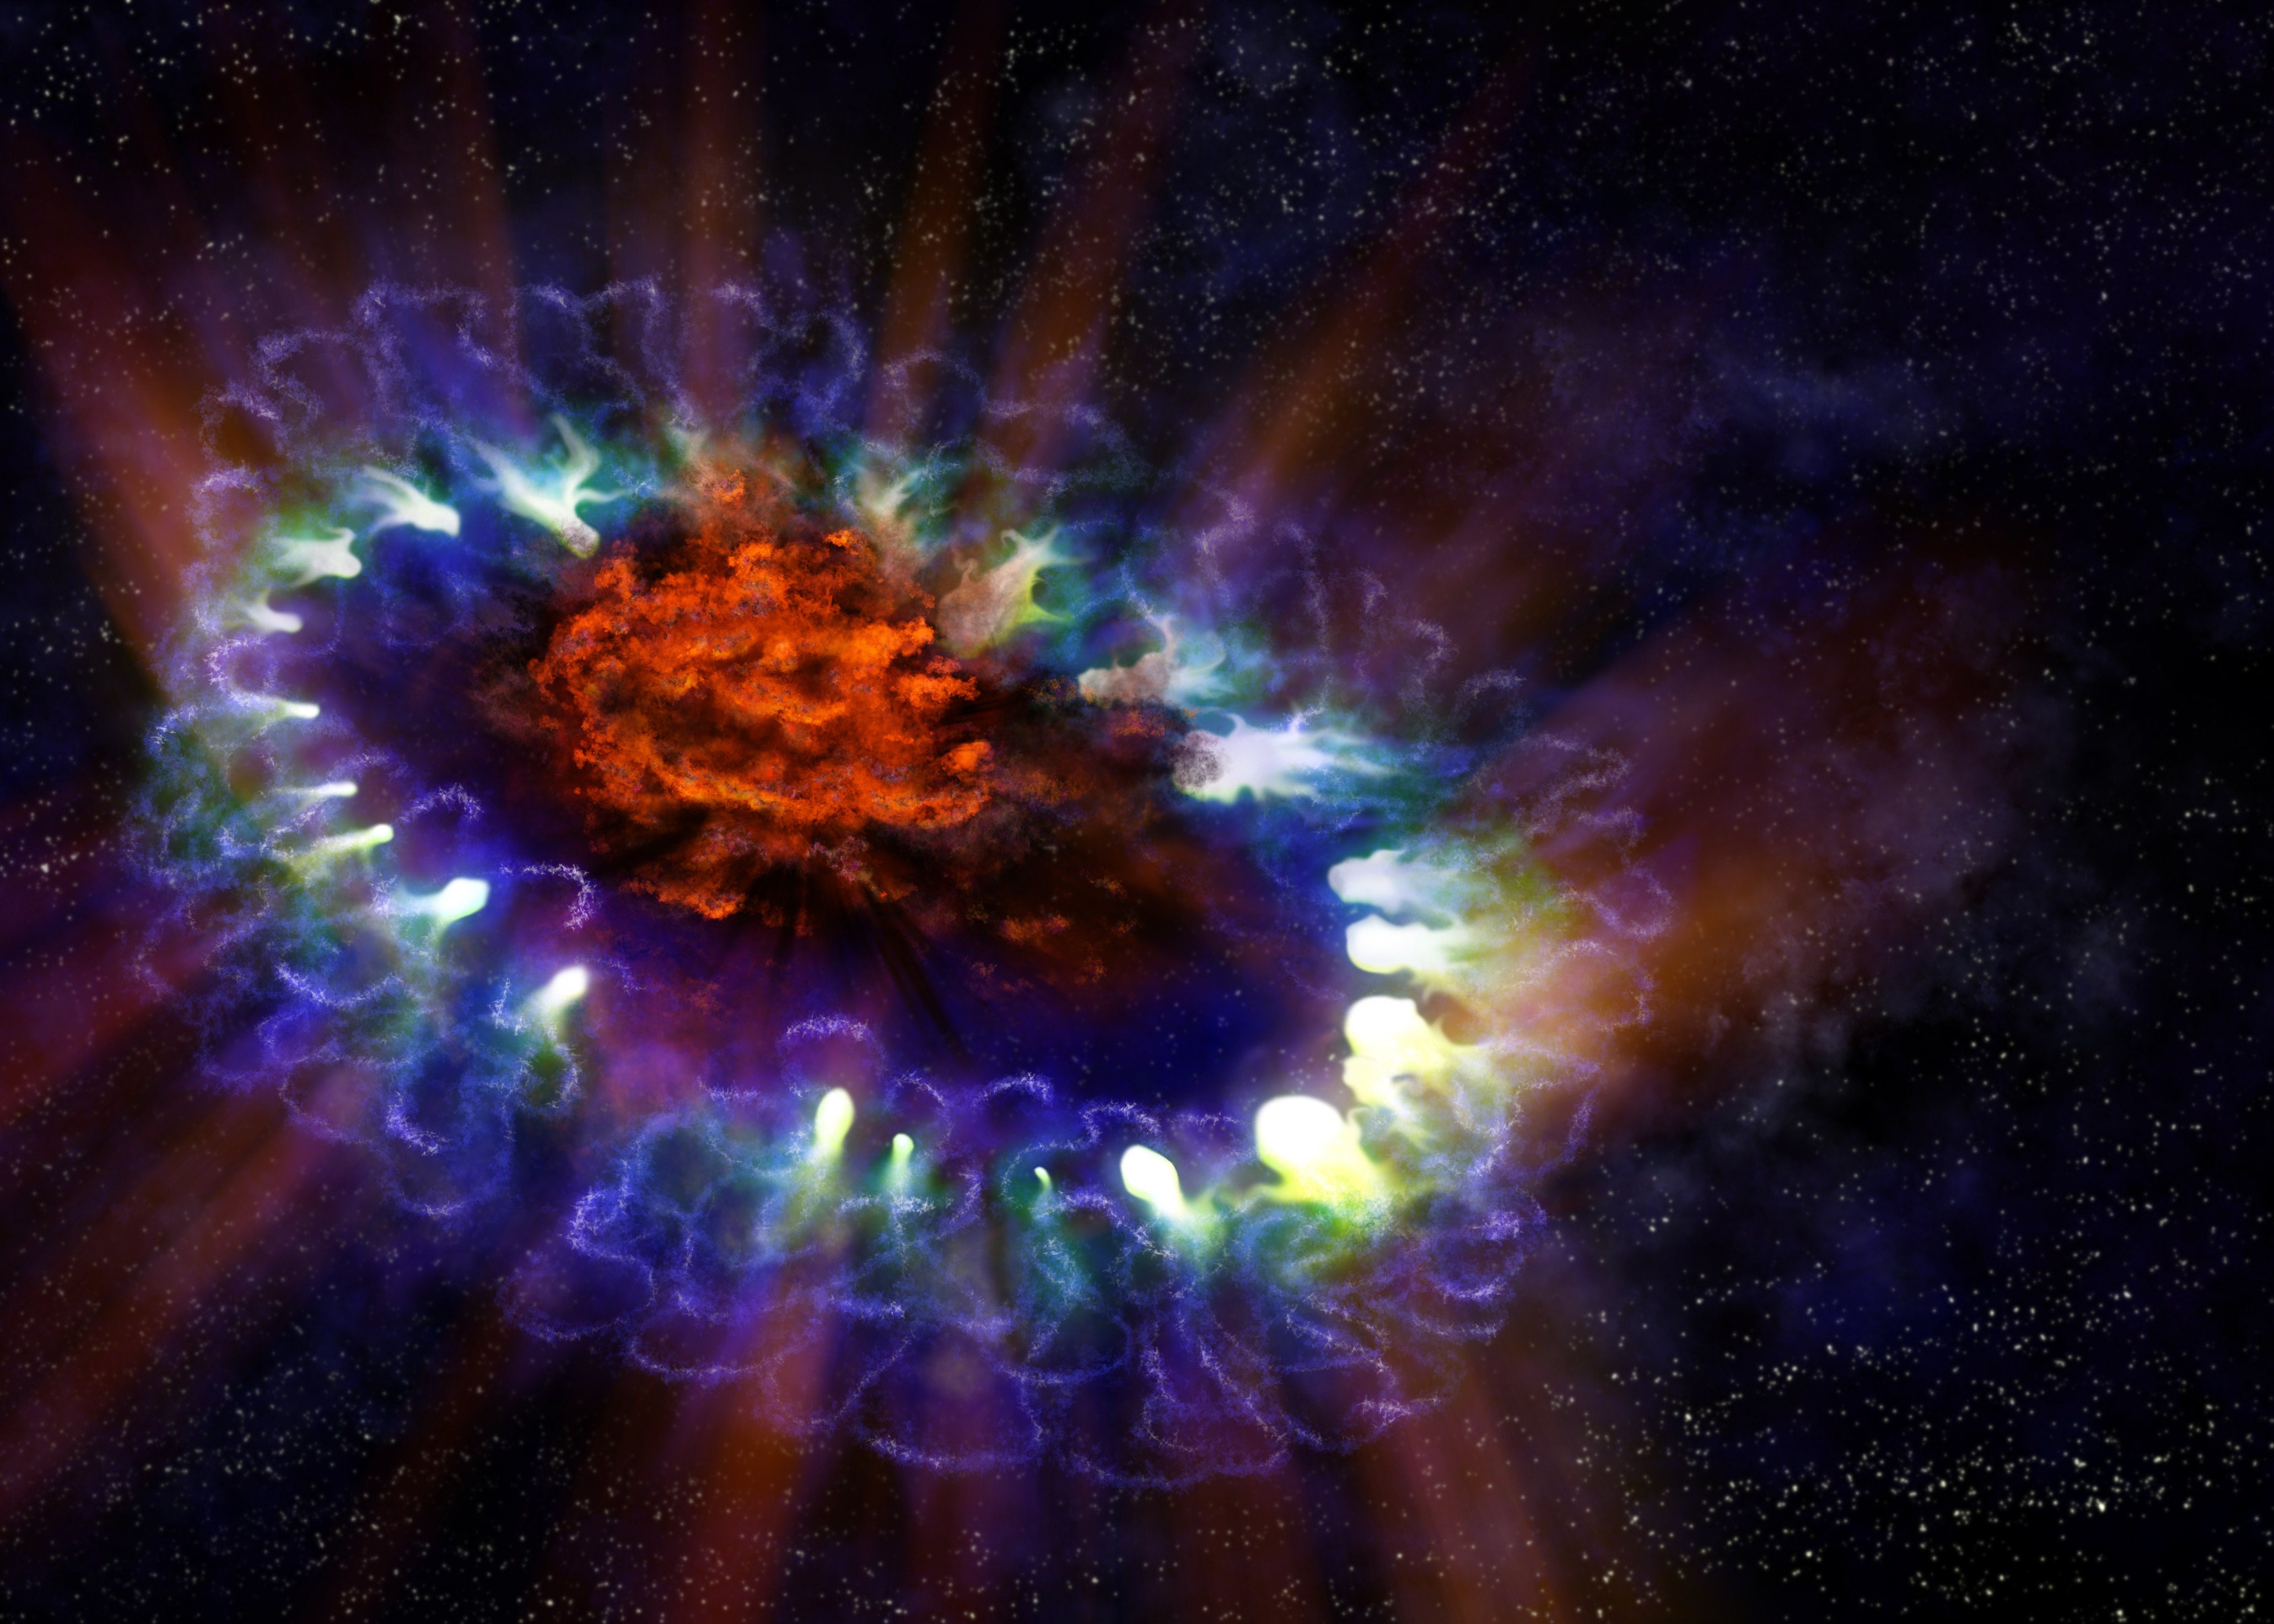 Artist's illustration of Supernova 1987A, based on real data with the cold, inner regions of the exploded star's remnants (in red) where tremendous  amounts of dust were detected and imaged by the Atacama Large Millimeter/submillimeter Array (ALMA).-- RESTRICTED TO EDITORIAL USE - MANDATORY CREDIT "AFP PHOTO / ESO/ALMA/NAOJ/NRAO/Alexandra Angelich" - NO MARKETING NO ADVERTISING CAMPAIGNS - DISTRIBUTED AS A SERVICE TO CLIENTSHO/AFP/Getty Images (Alexandra Angelich / NRAO / NAOJ / ALMA / ESO / AFP / Getty Images)